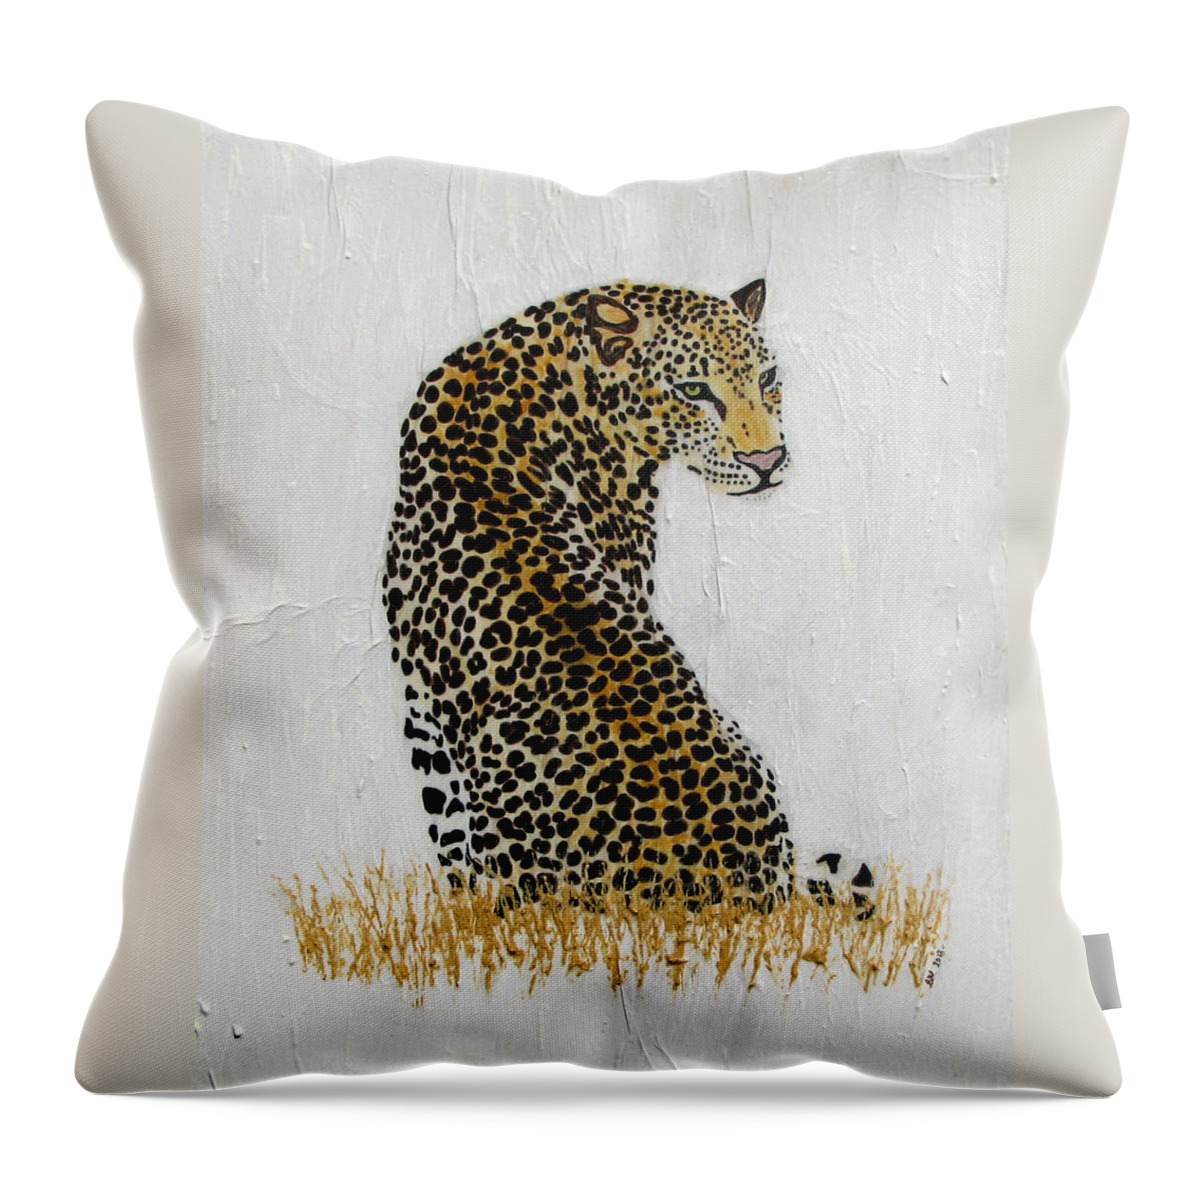 Leopard Throw Pillow featuring the painting Ever Watchful by Stephanie Grant